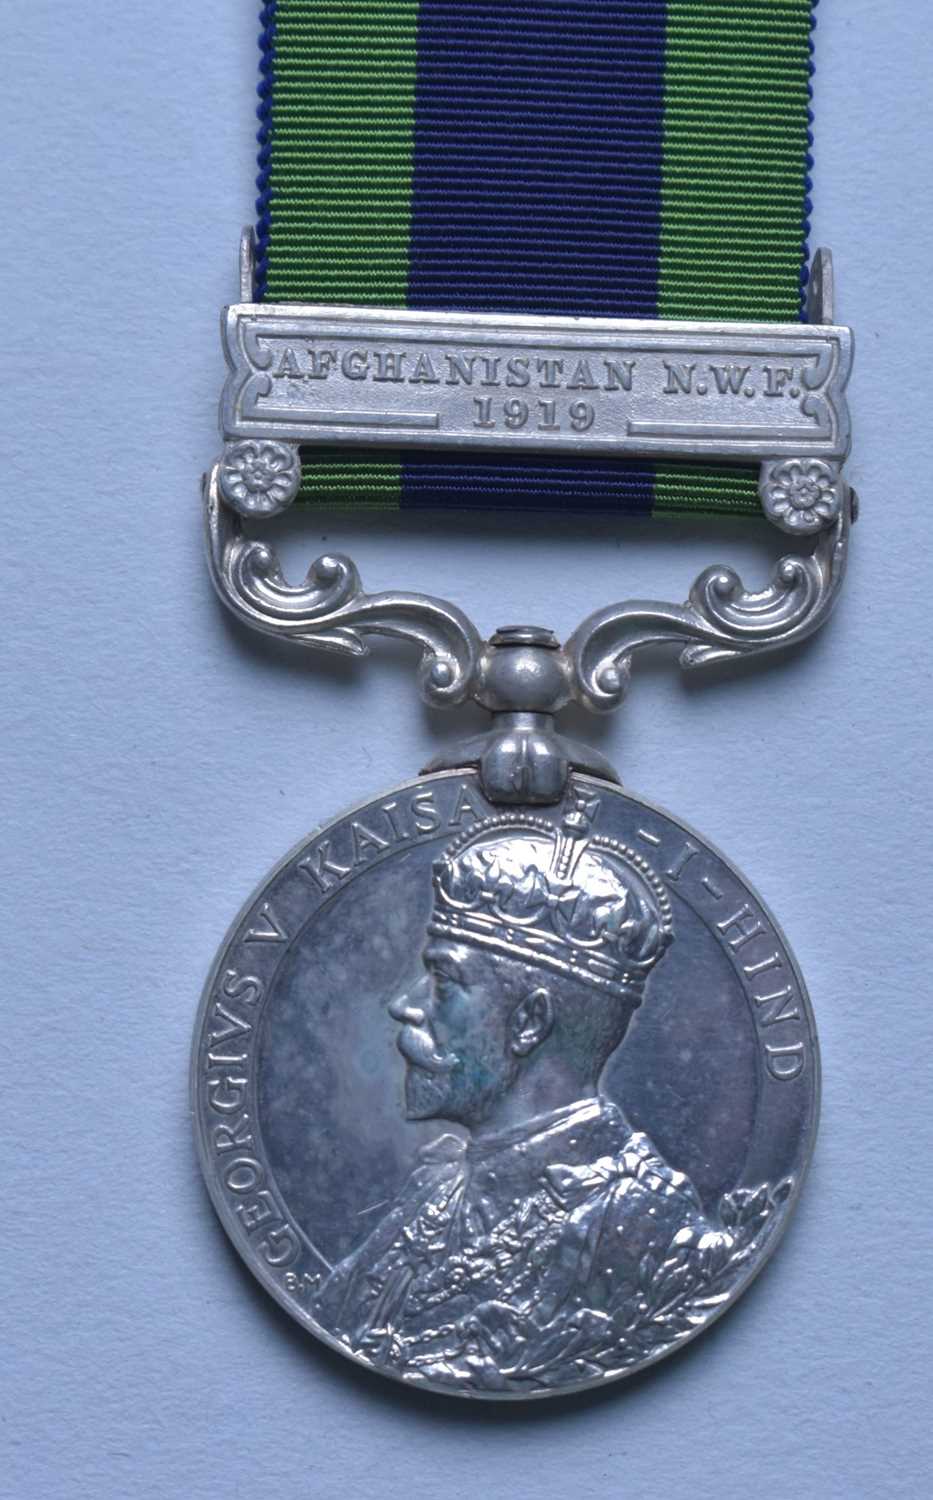 Lot 311 - India General Service Medal